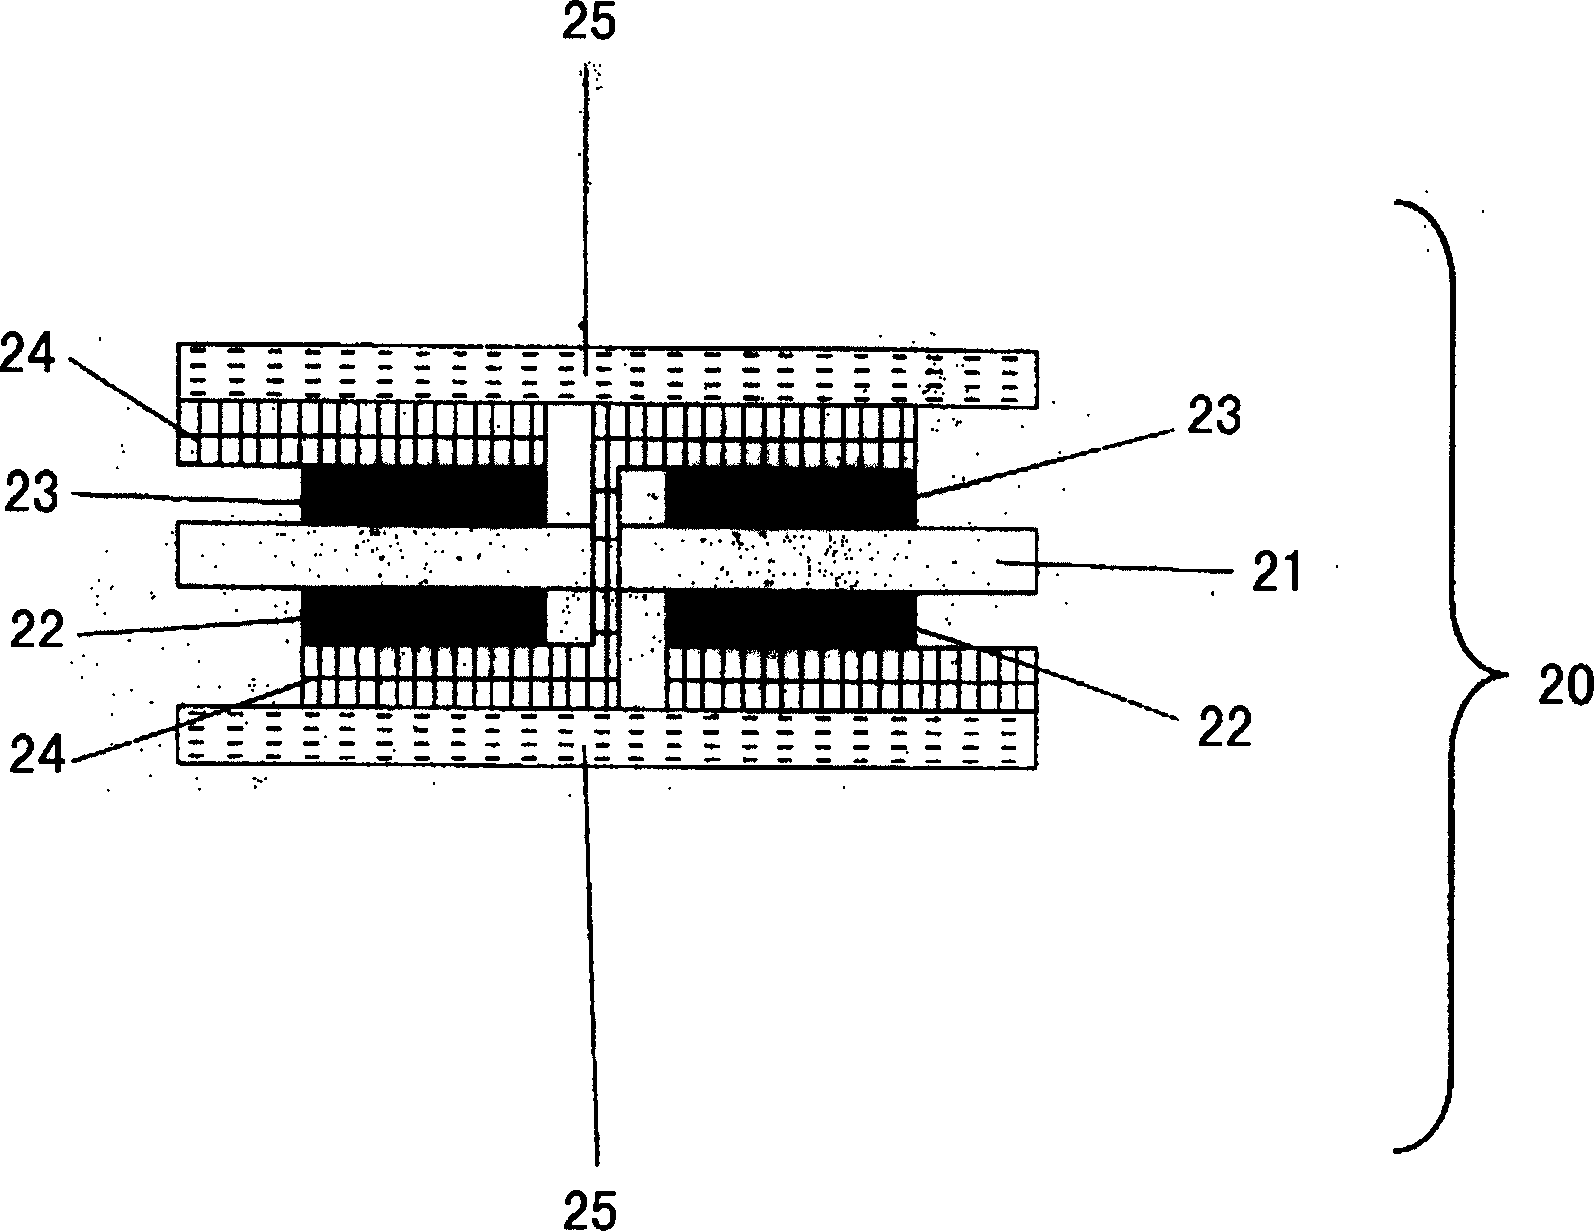 Air self-breathing type micro-direct alcohol fuel cell structure and making method